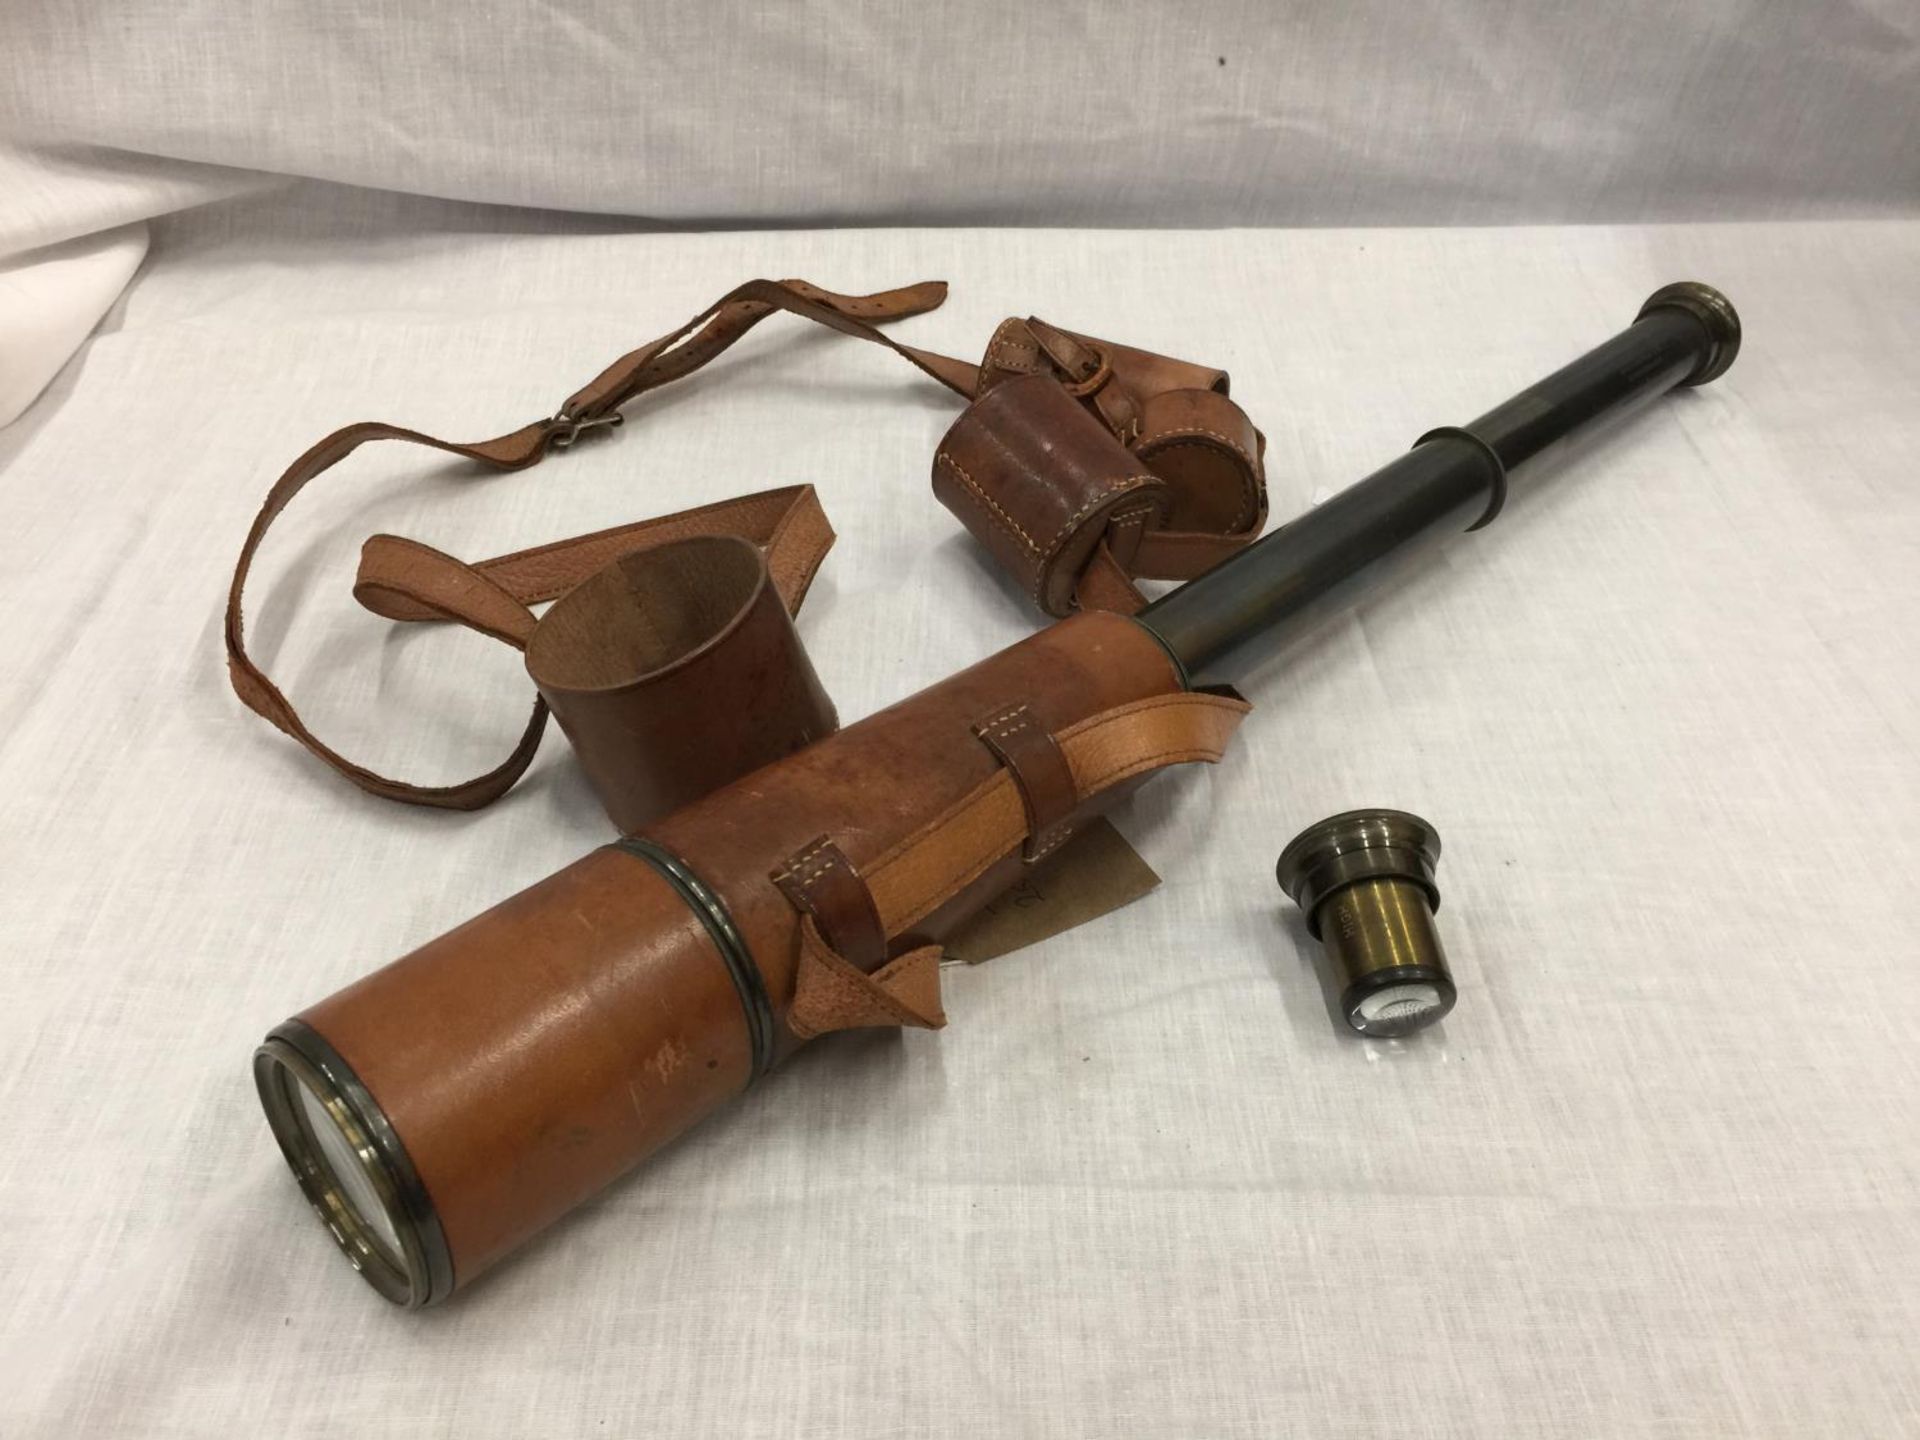 A VINTAGE BRASS AND LEATHER TELESCOPE RECONDITIONED FOR JOHN BARKER & CO LTD KENSINGTON W.8. BY